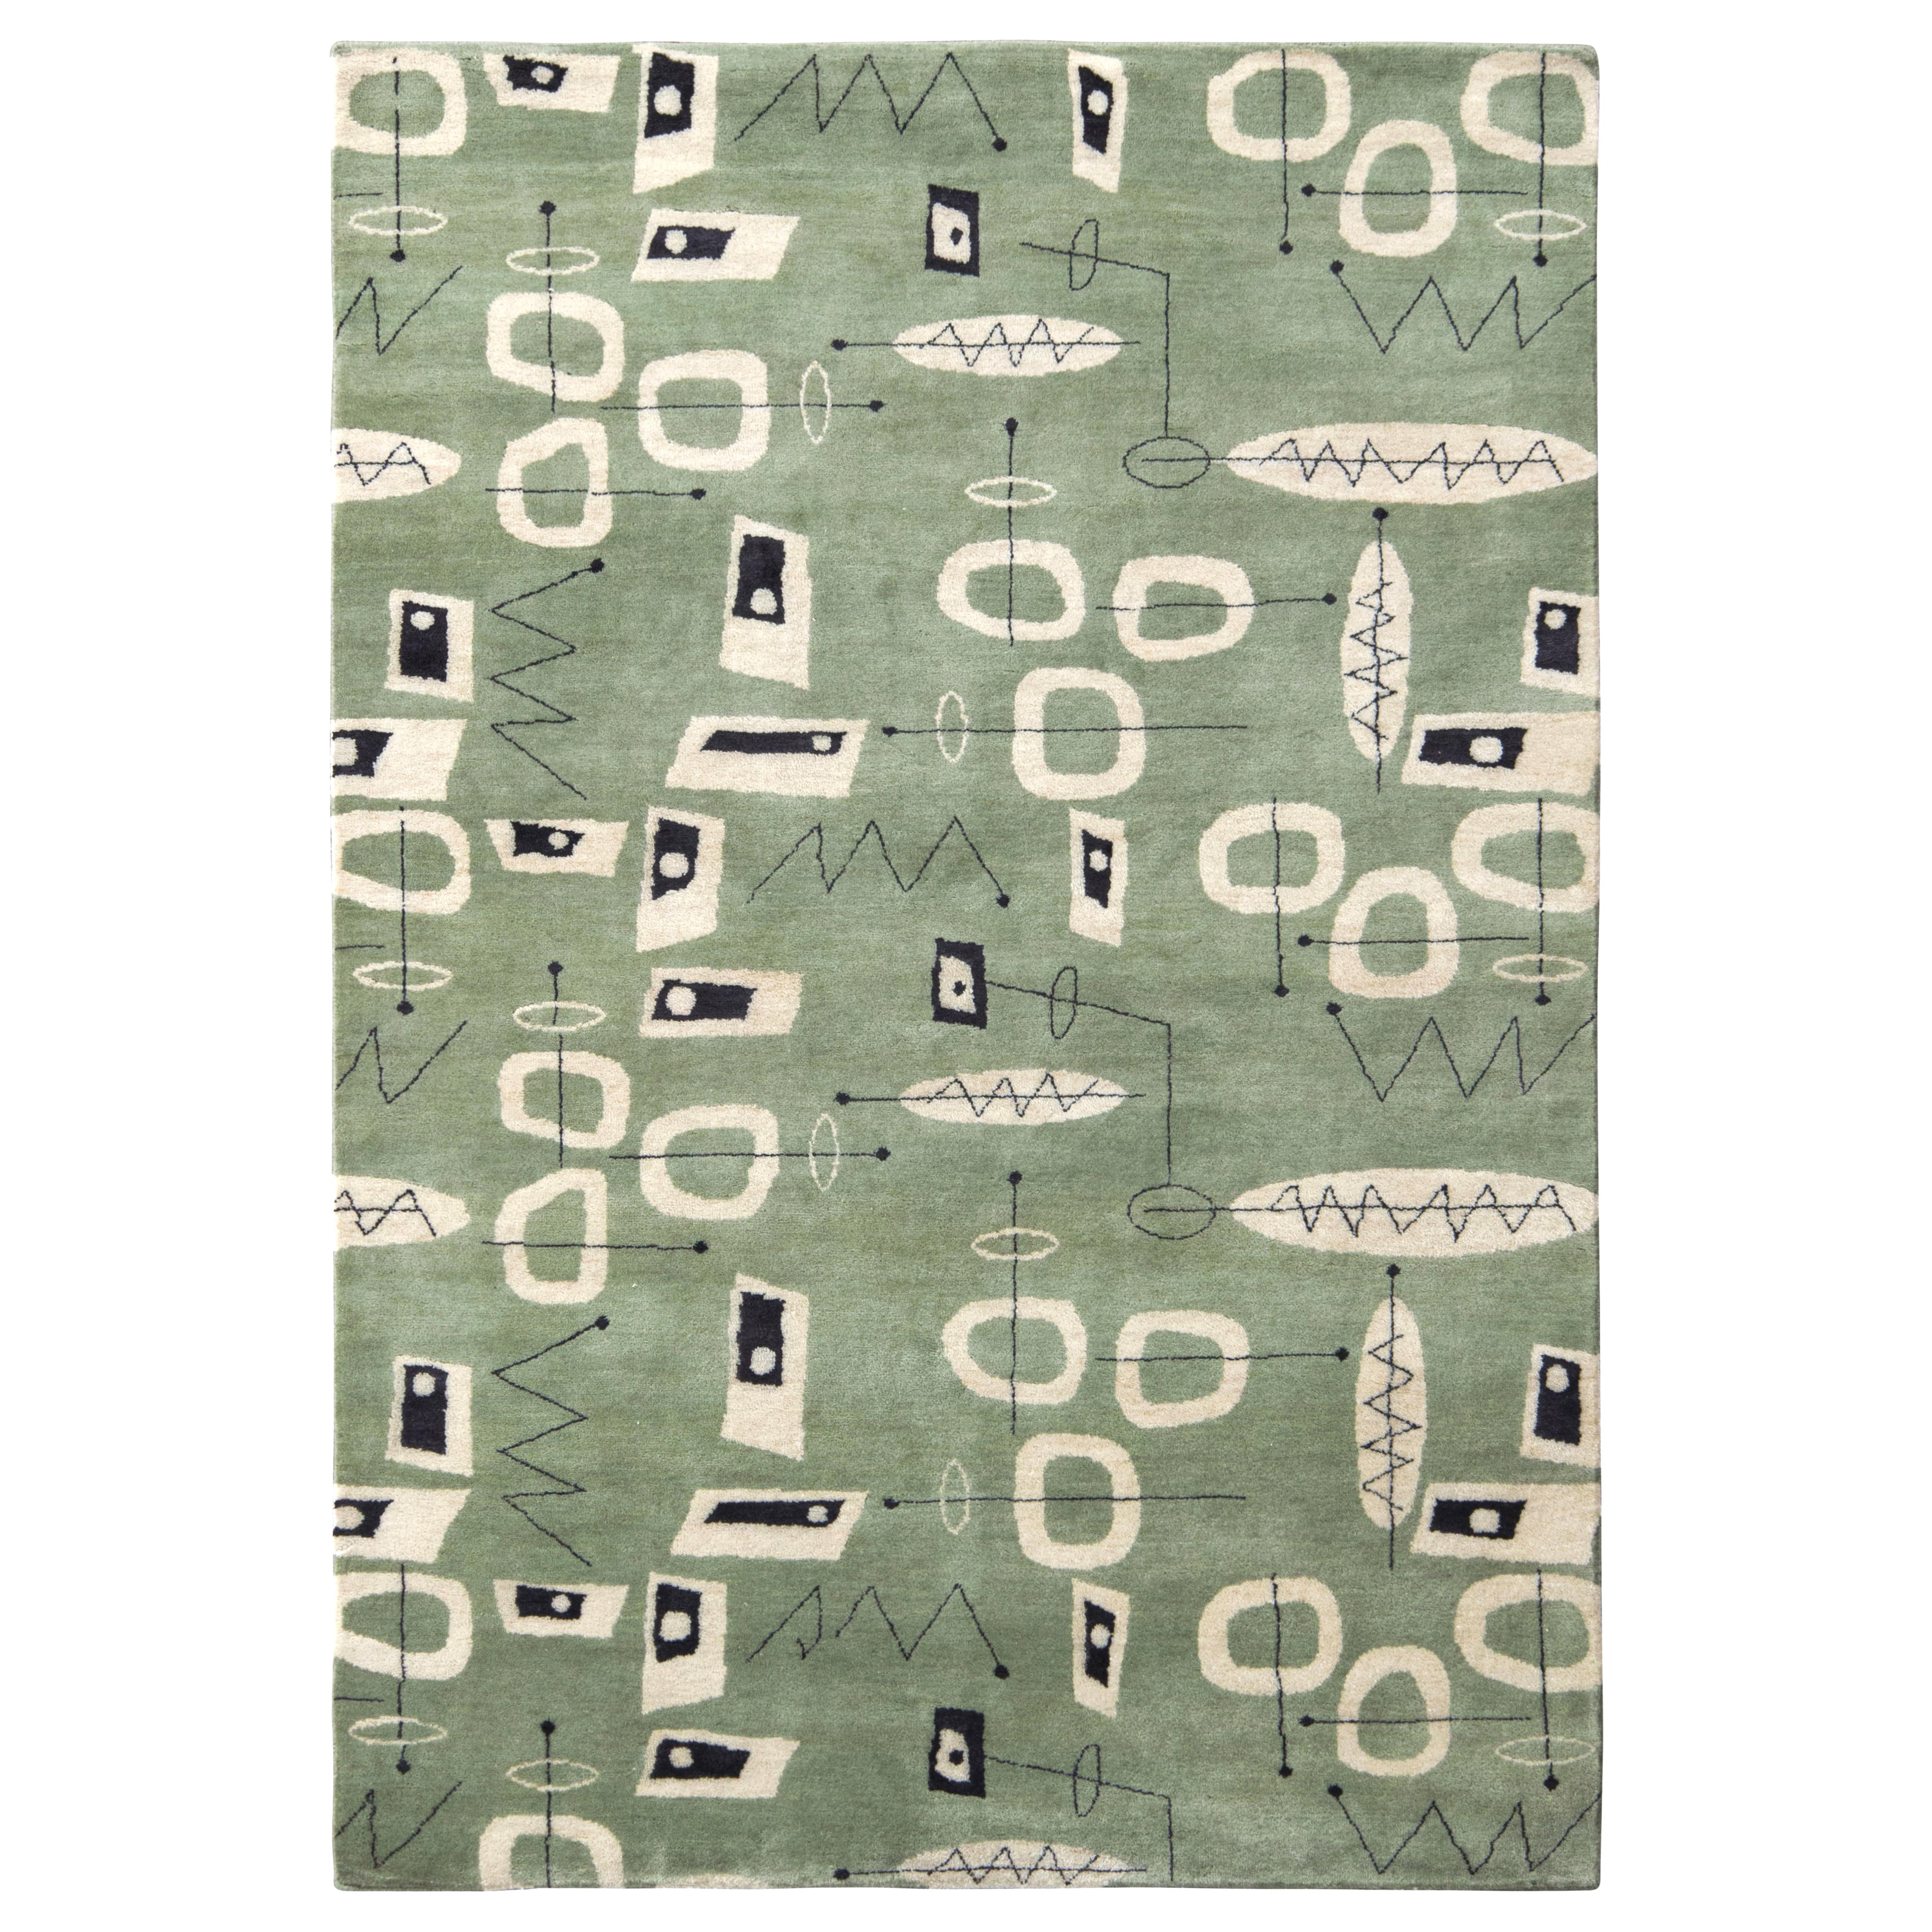 Made with unique blend of hand knotted New Zealand wool, all natural silk, and exotic proprietary yarns in 4 x 6 size, this Mid-Century Modern rug hails from the latest additions to the Mid-Century Modern Collection by Rug & Kilim, the first